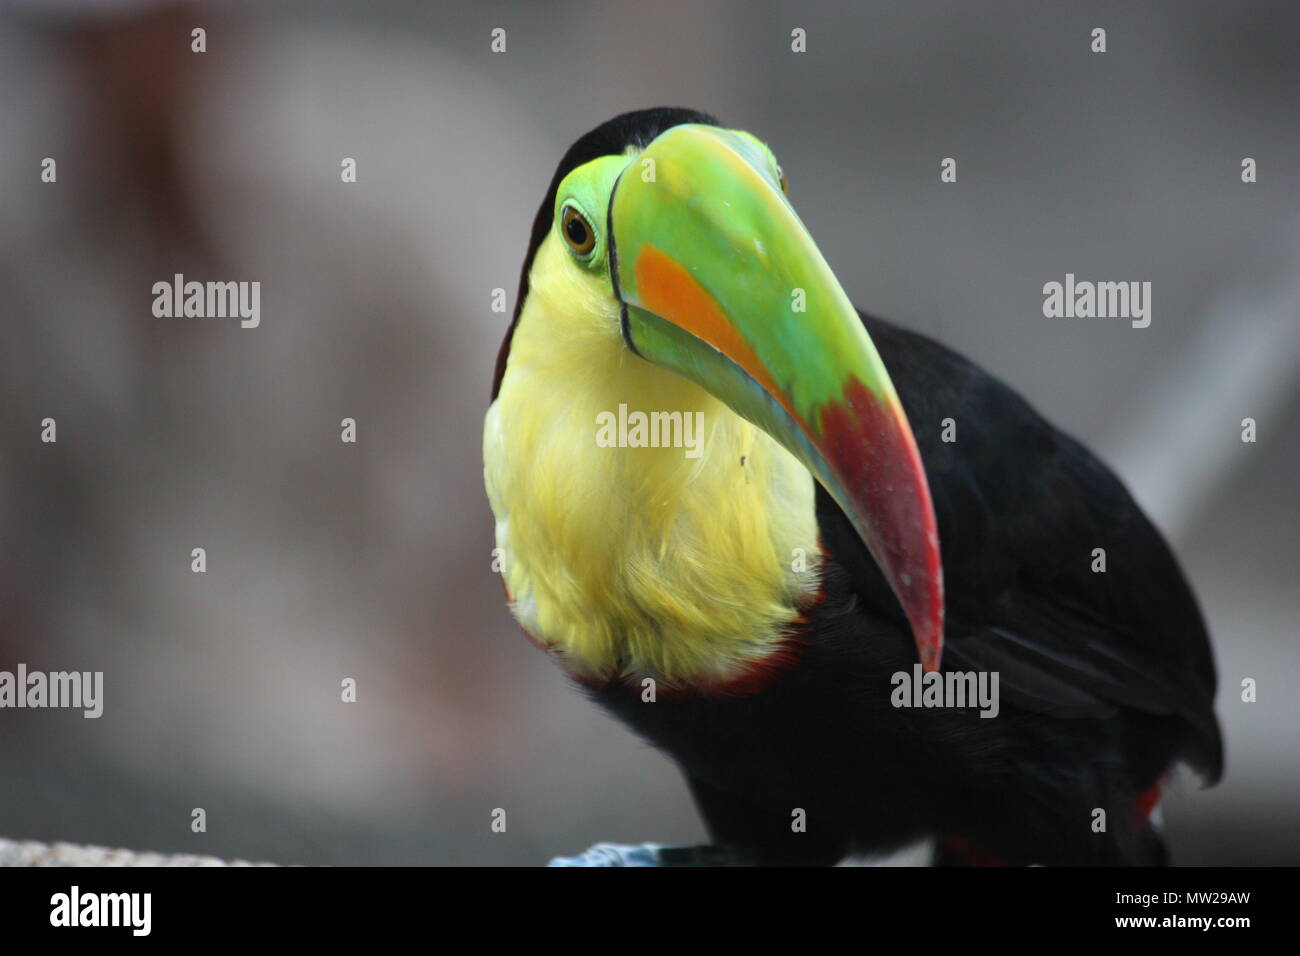 Colorful toucan from Costa Rica Stock Photo